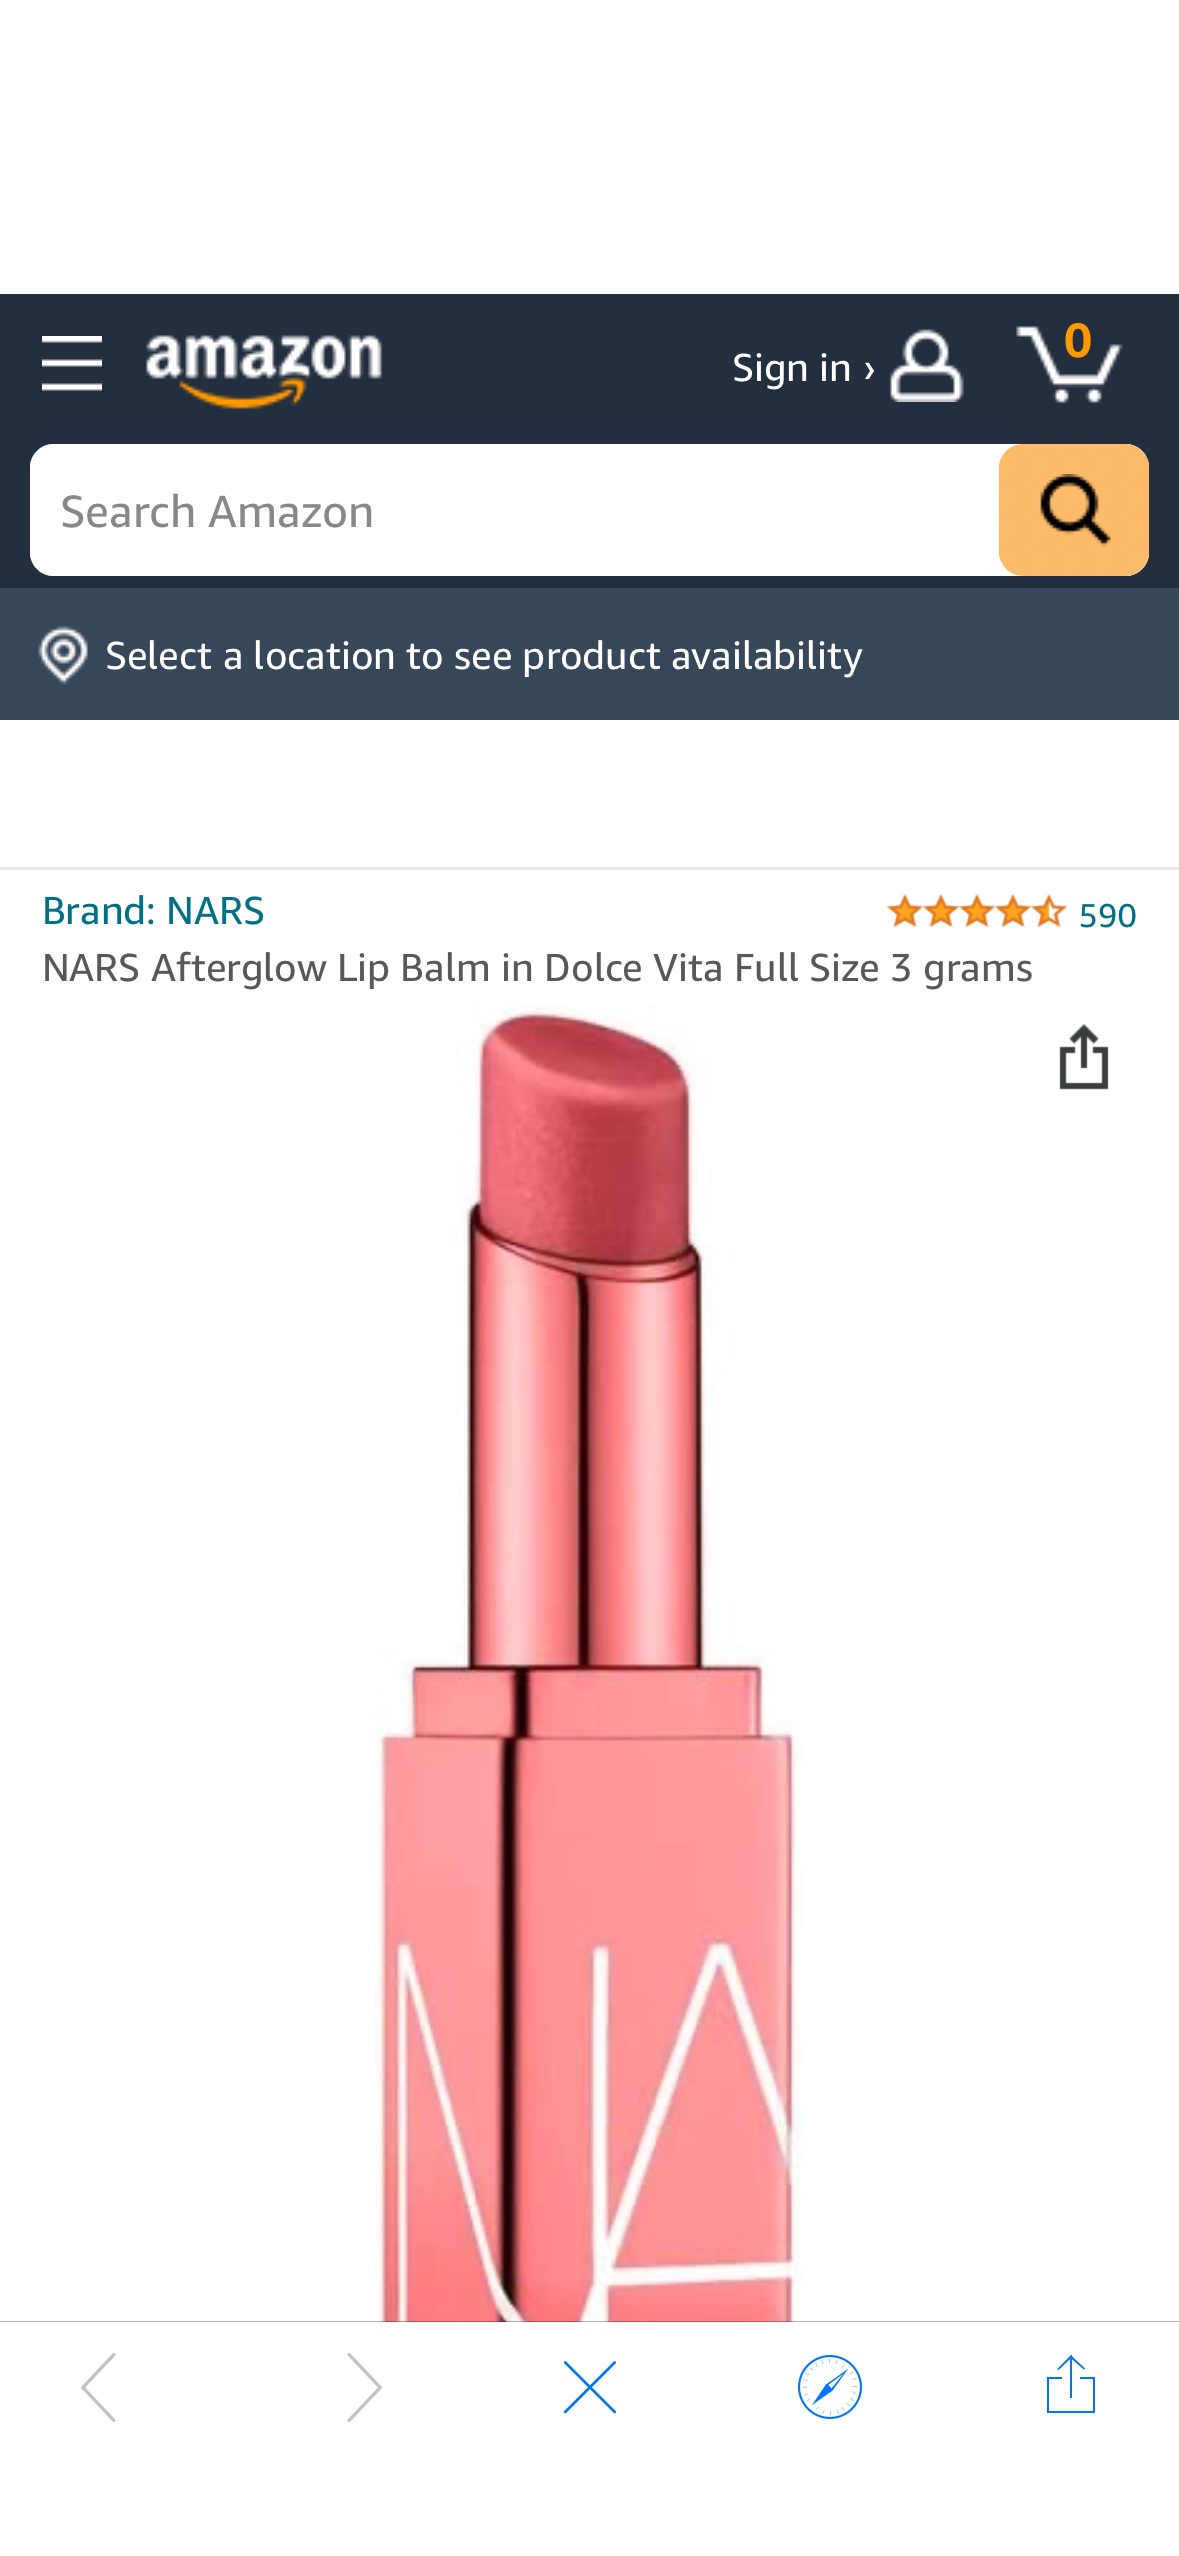 Amazon.com: NARS Afterglow Lip Balm in Dolce Vita Full Size 3 grams : Everything Else口红